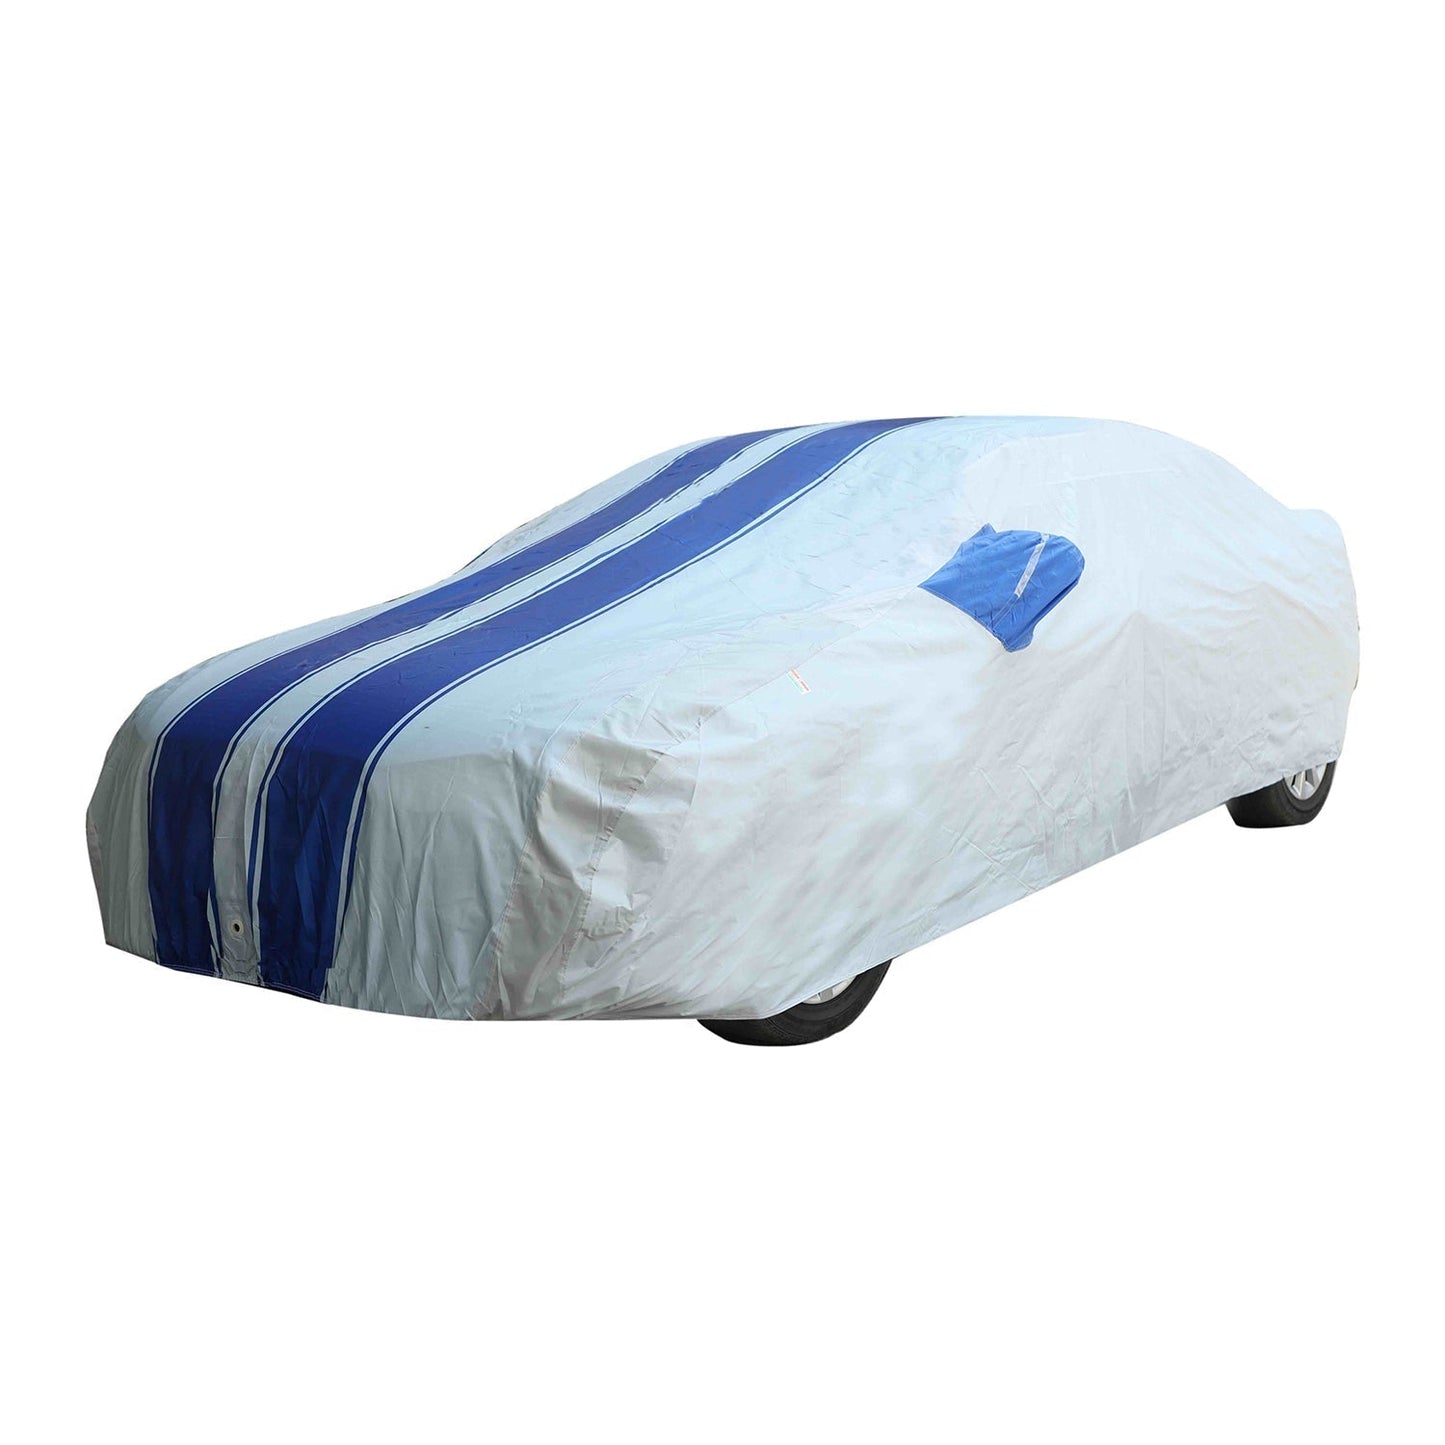 Oshotto 100% Blue dustproof and Water Resistant Car Body Cover with Mirror Pockets For Lexus NX